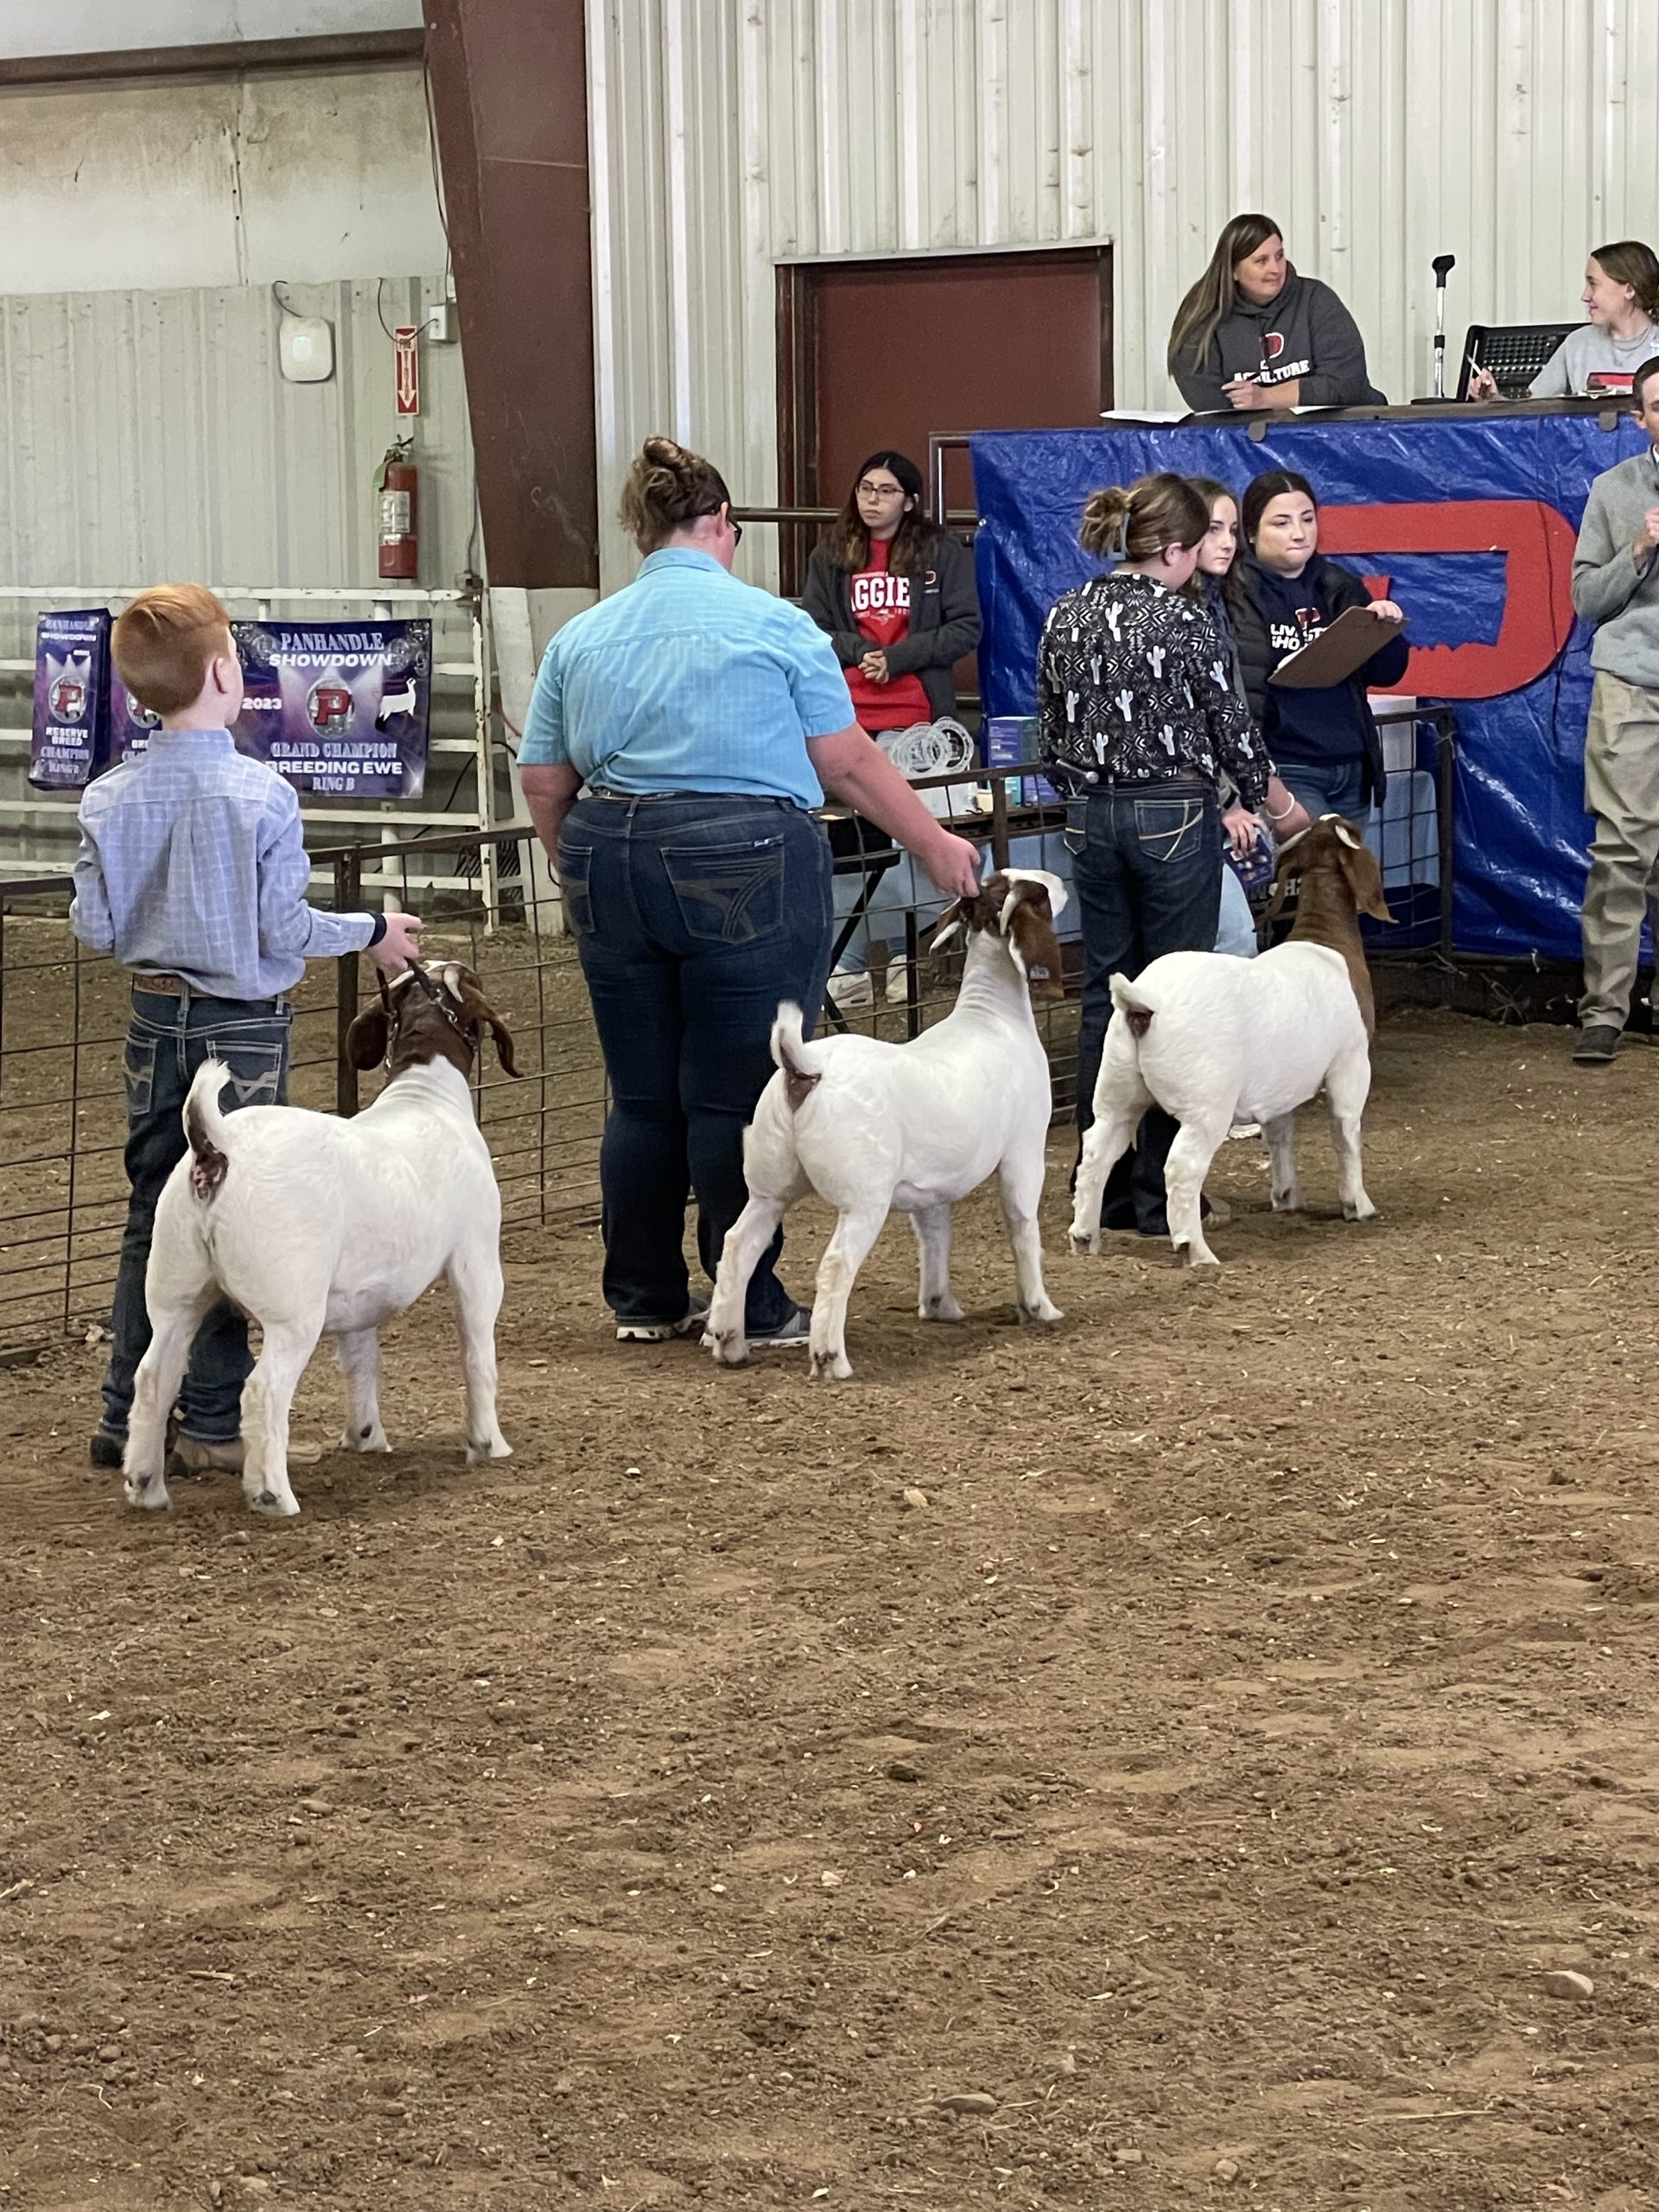 One of the goat classes at Oklahoma Panhandle State University's recent Panhandle Showdown. (Journal photo by Jennifer Theurer.)